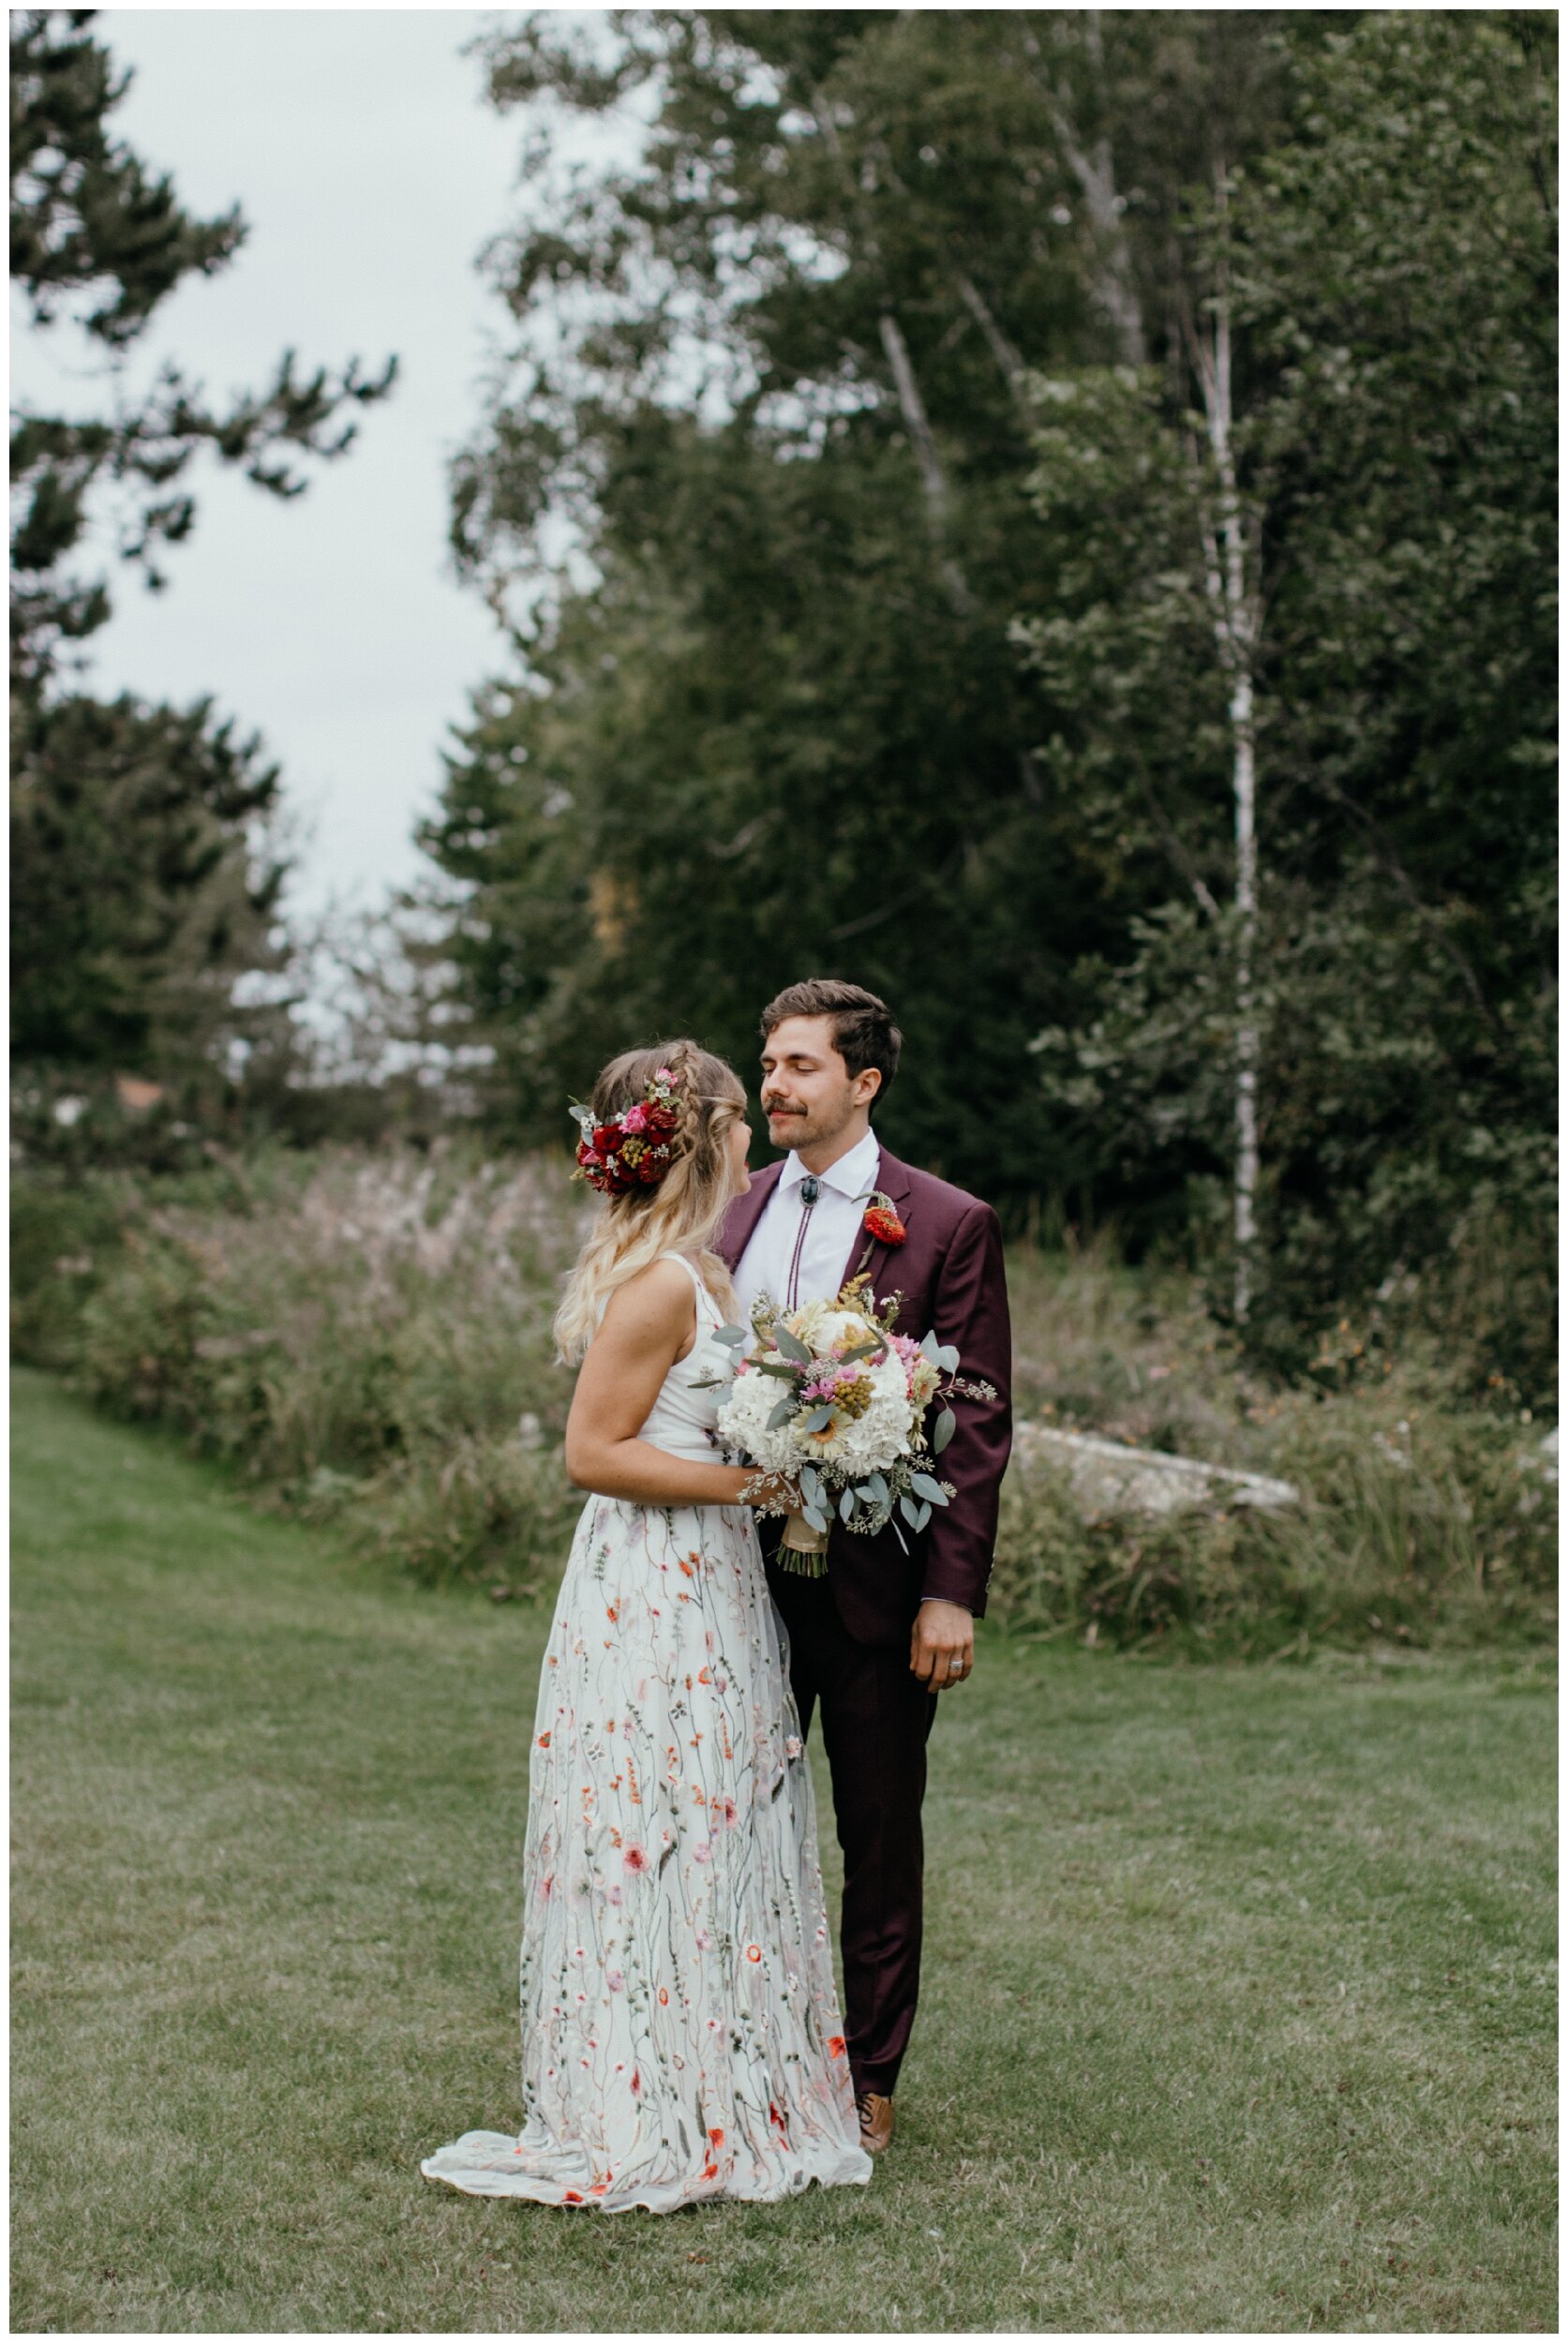 Bride wearing whimsical floral print wedding dress while looking at groom during Minnesota summer camp wedding in the woods